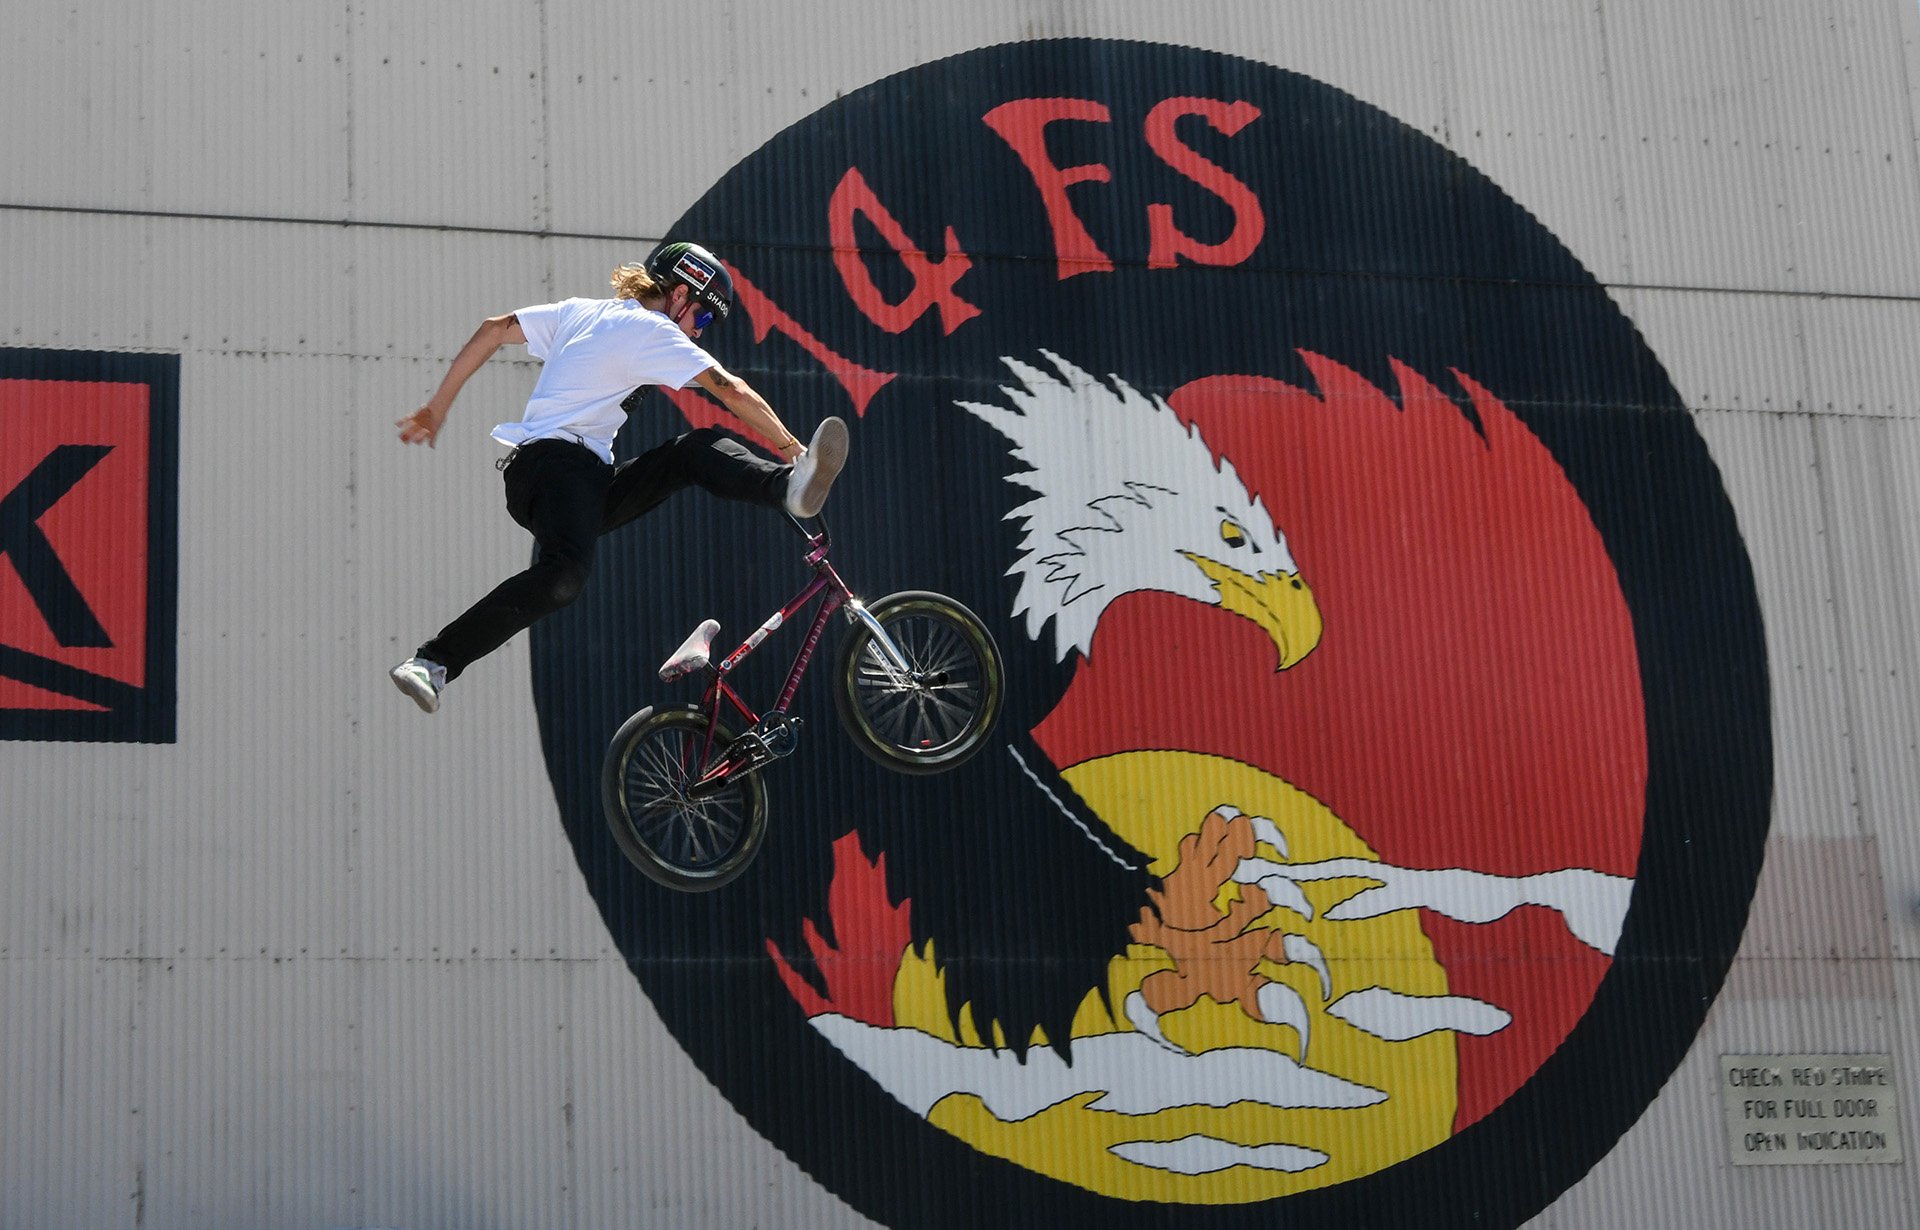  Peyton Wessells performs as a part of the Monster BMX Stunt Team at the Sentry Eagle Open House June 24, 2022, at Kingsley Field in Klamath Falls, Oregon. The open house allowed Kingsley Field to provide a behind-the-scenes look at our F-15 training